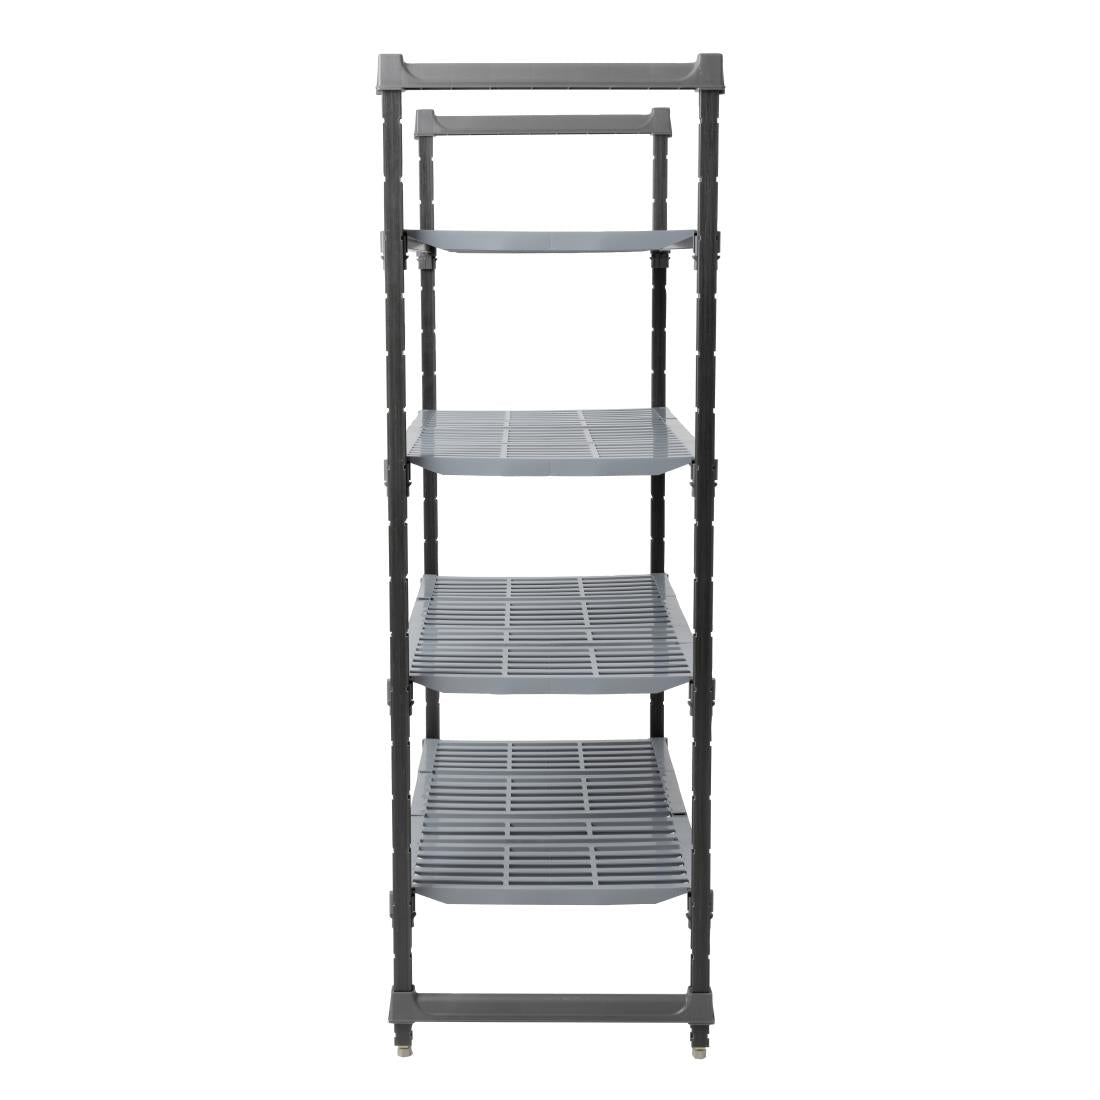 DM773 Cambro Stationary Vented 4 Shelf Starter Units 1830 x 1070 x 610mm JD Catering Equipment Solutions Ltd